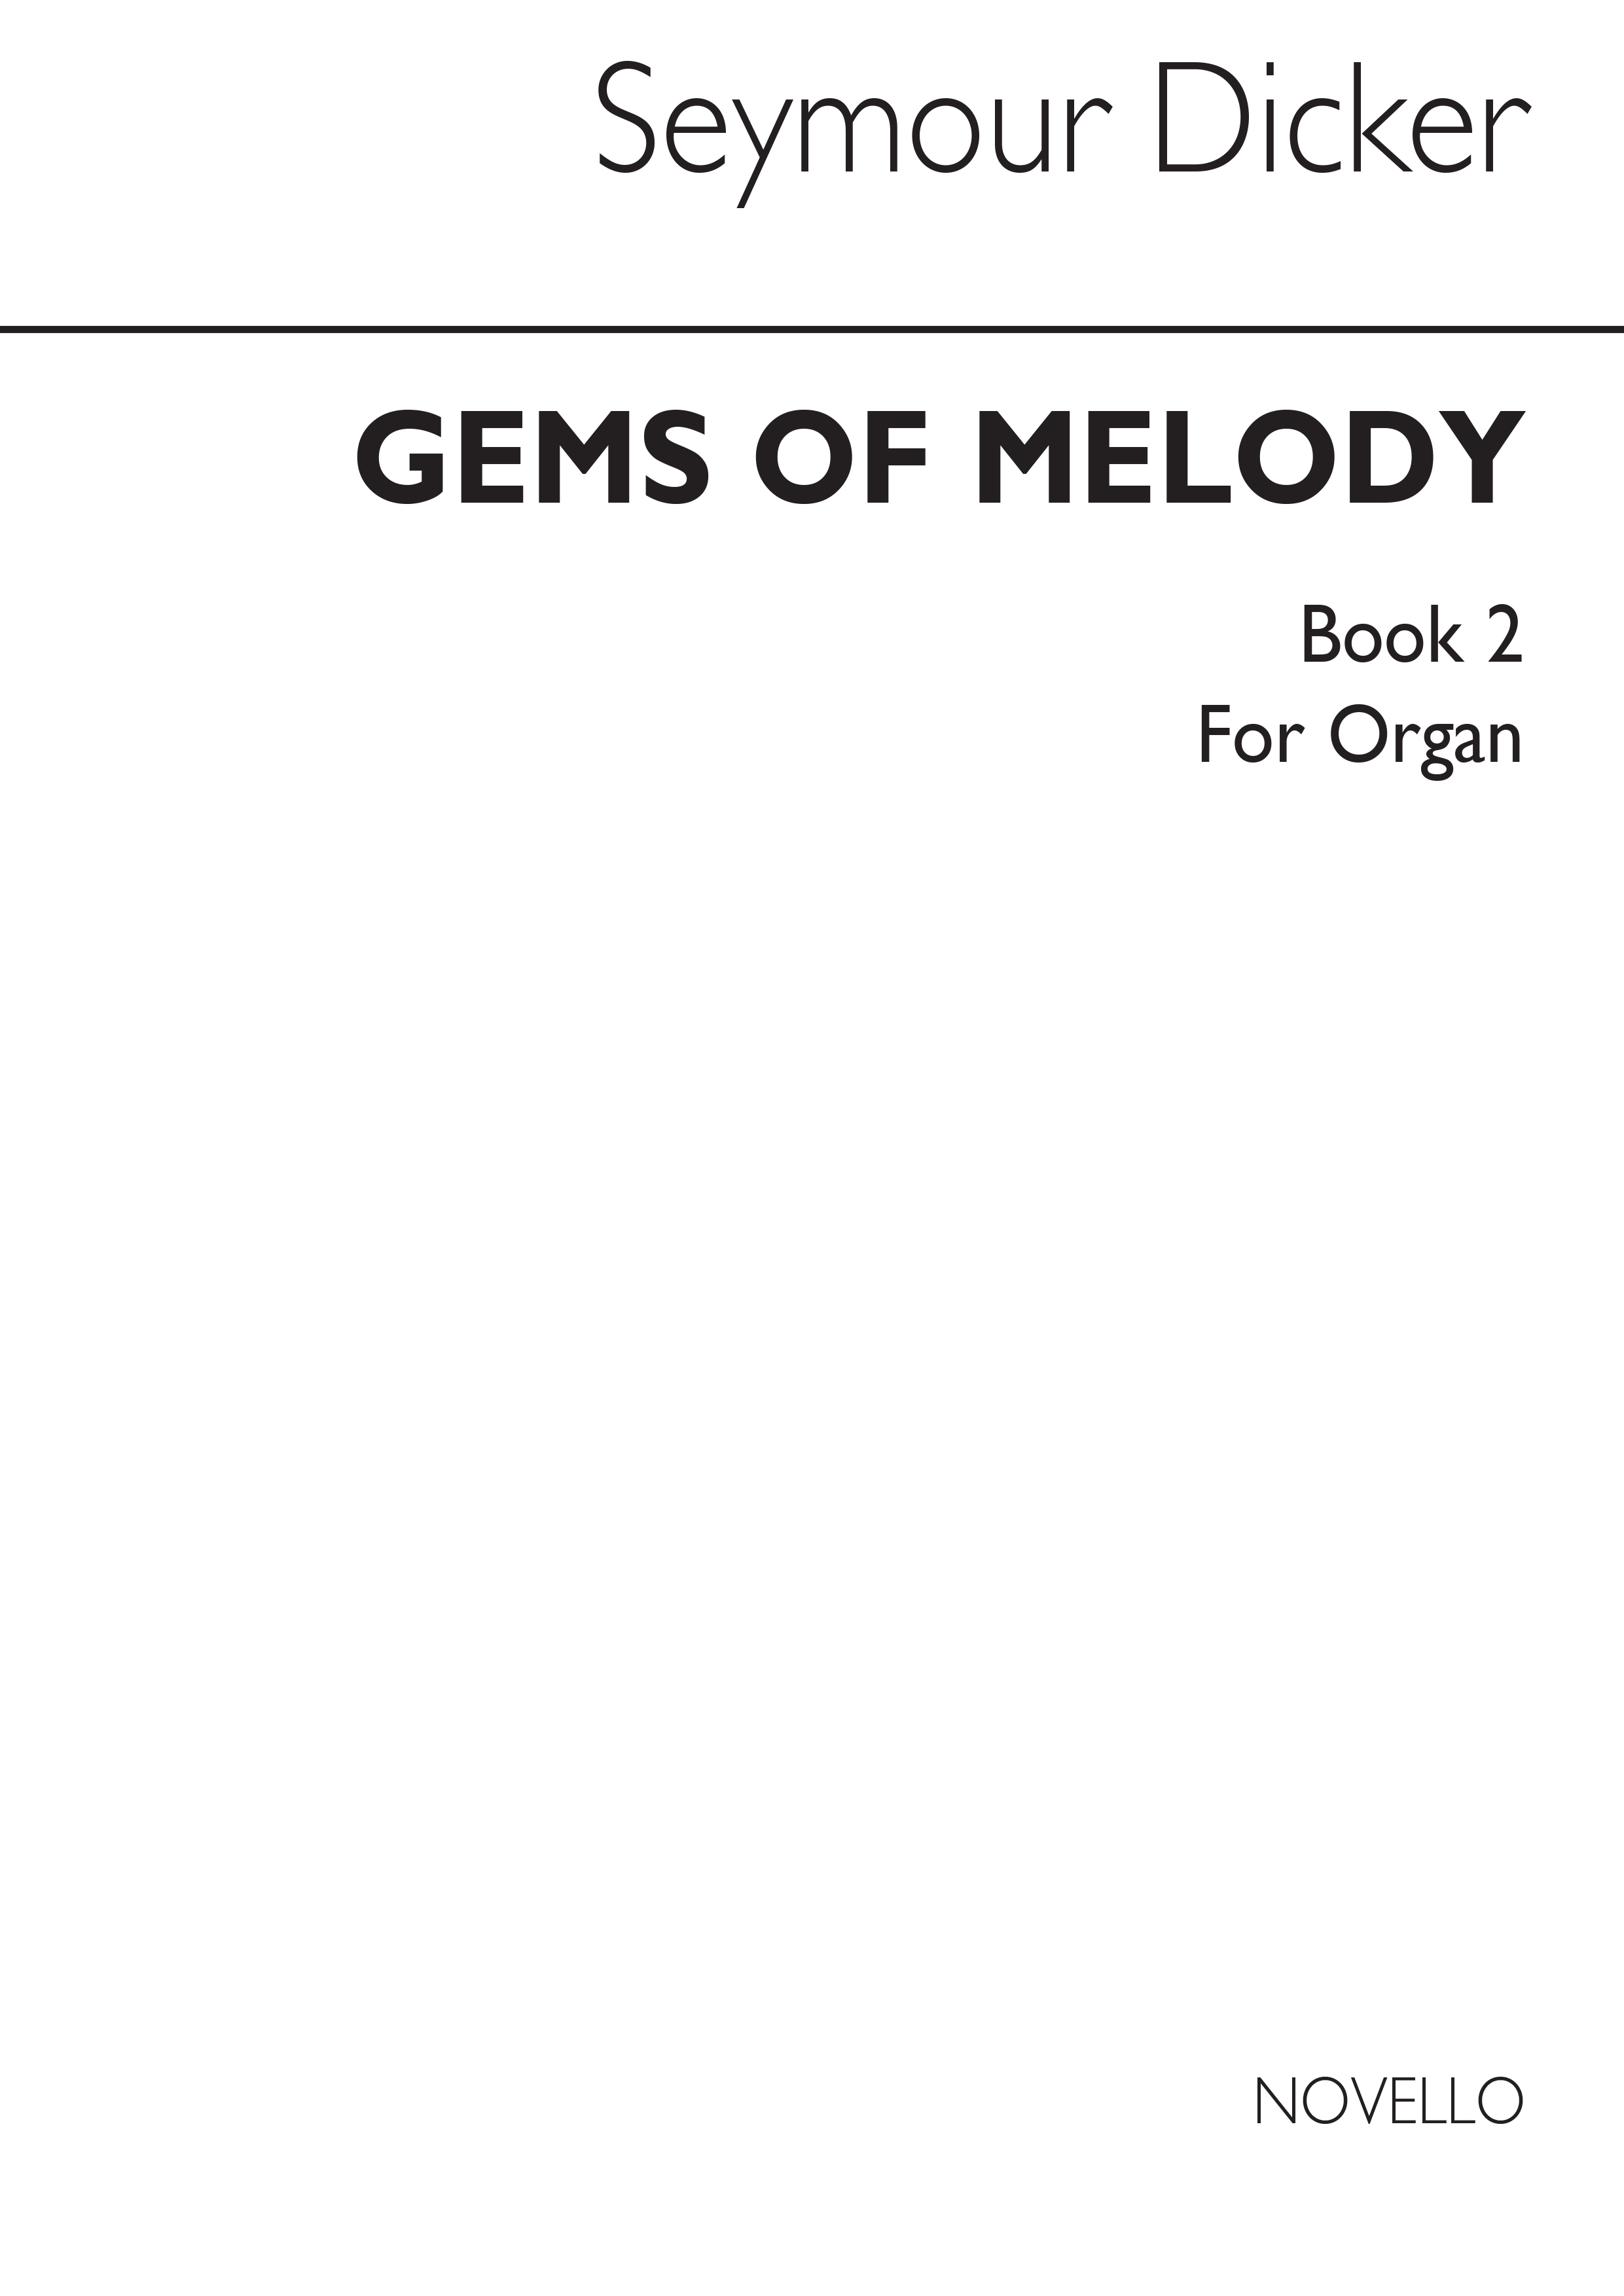 Dicker, S Gems Of Melody For Organ Book 2